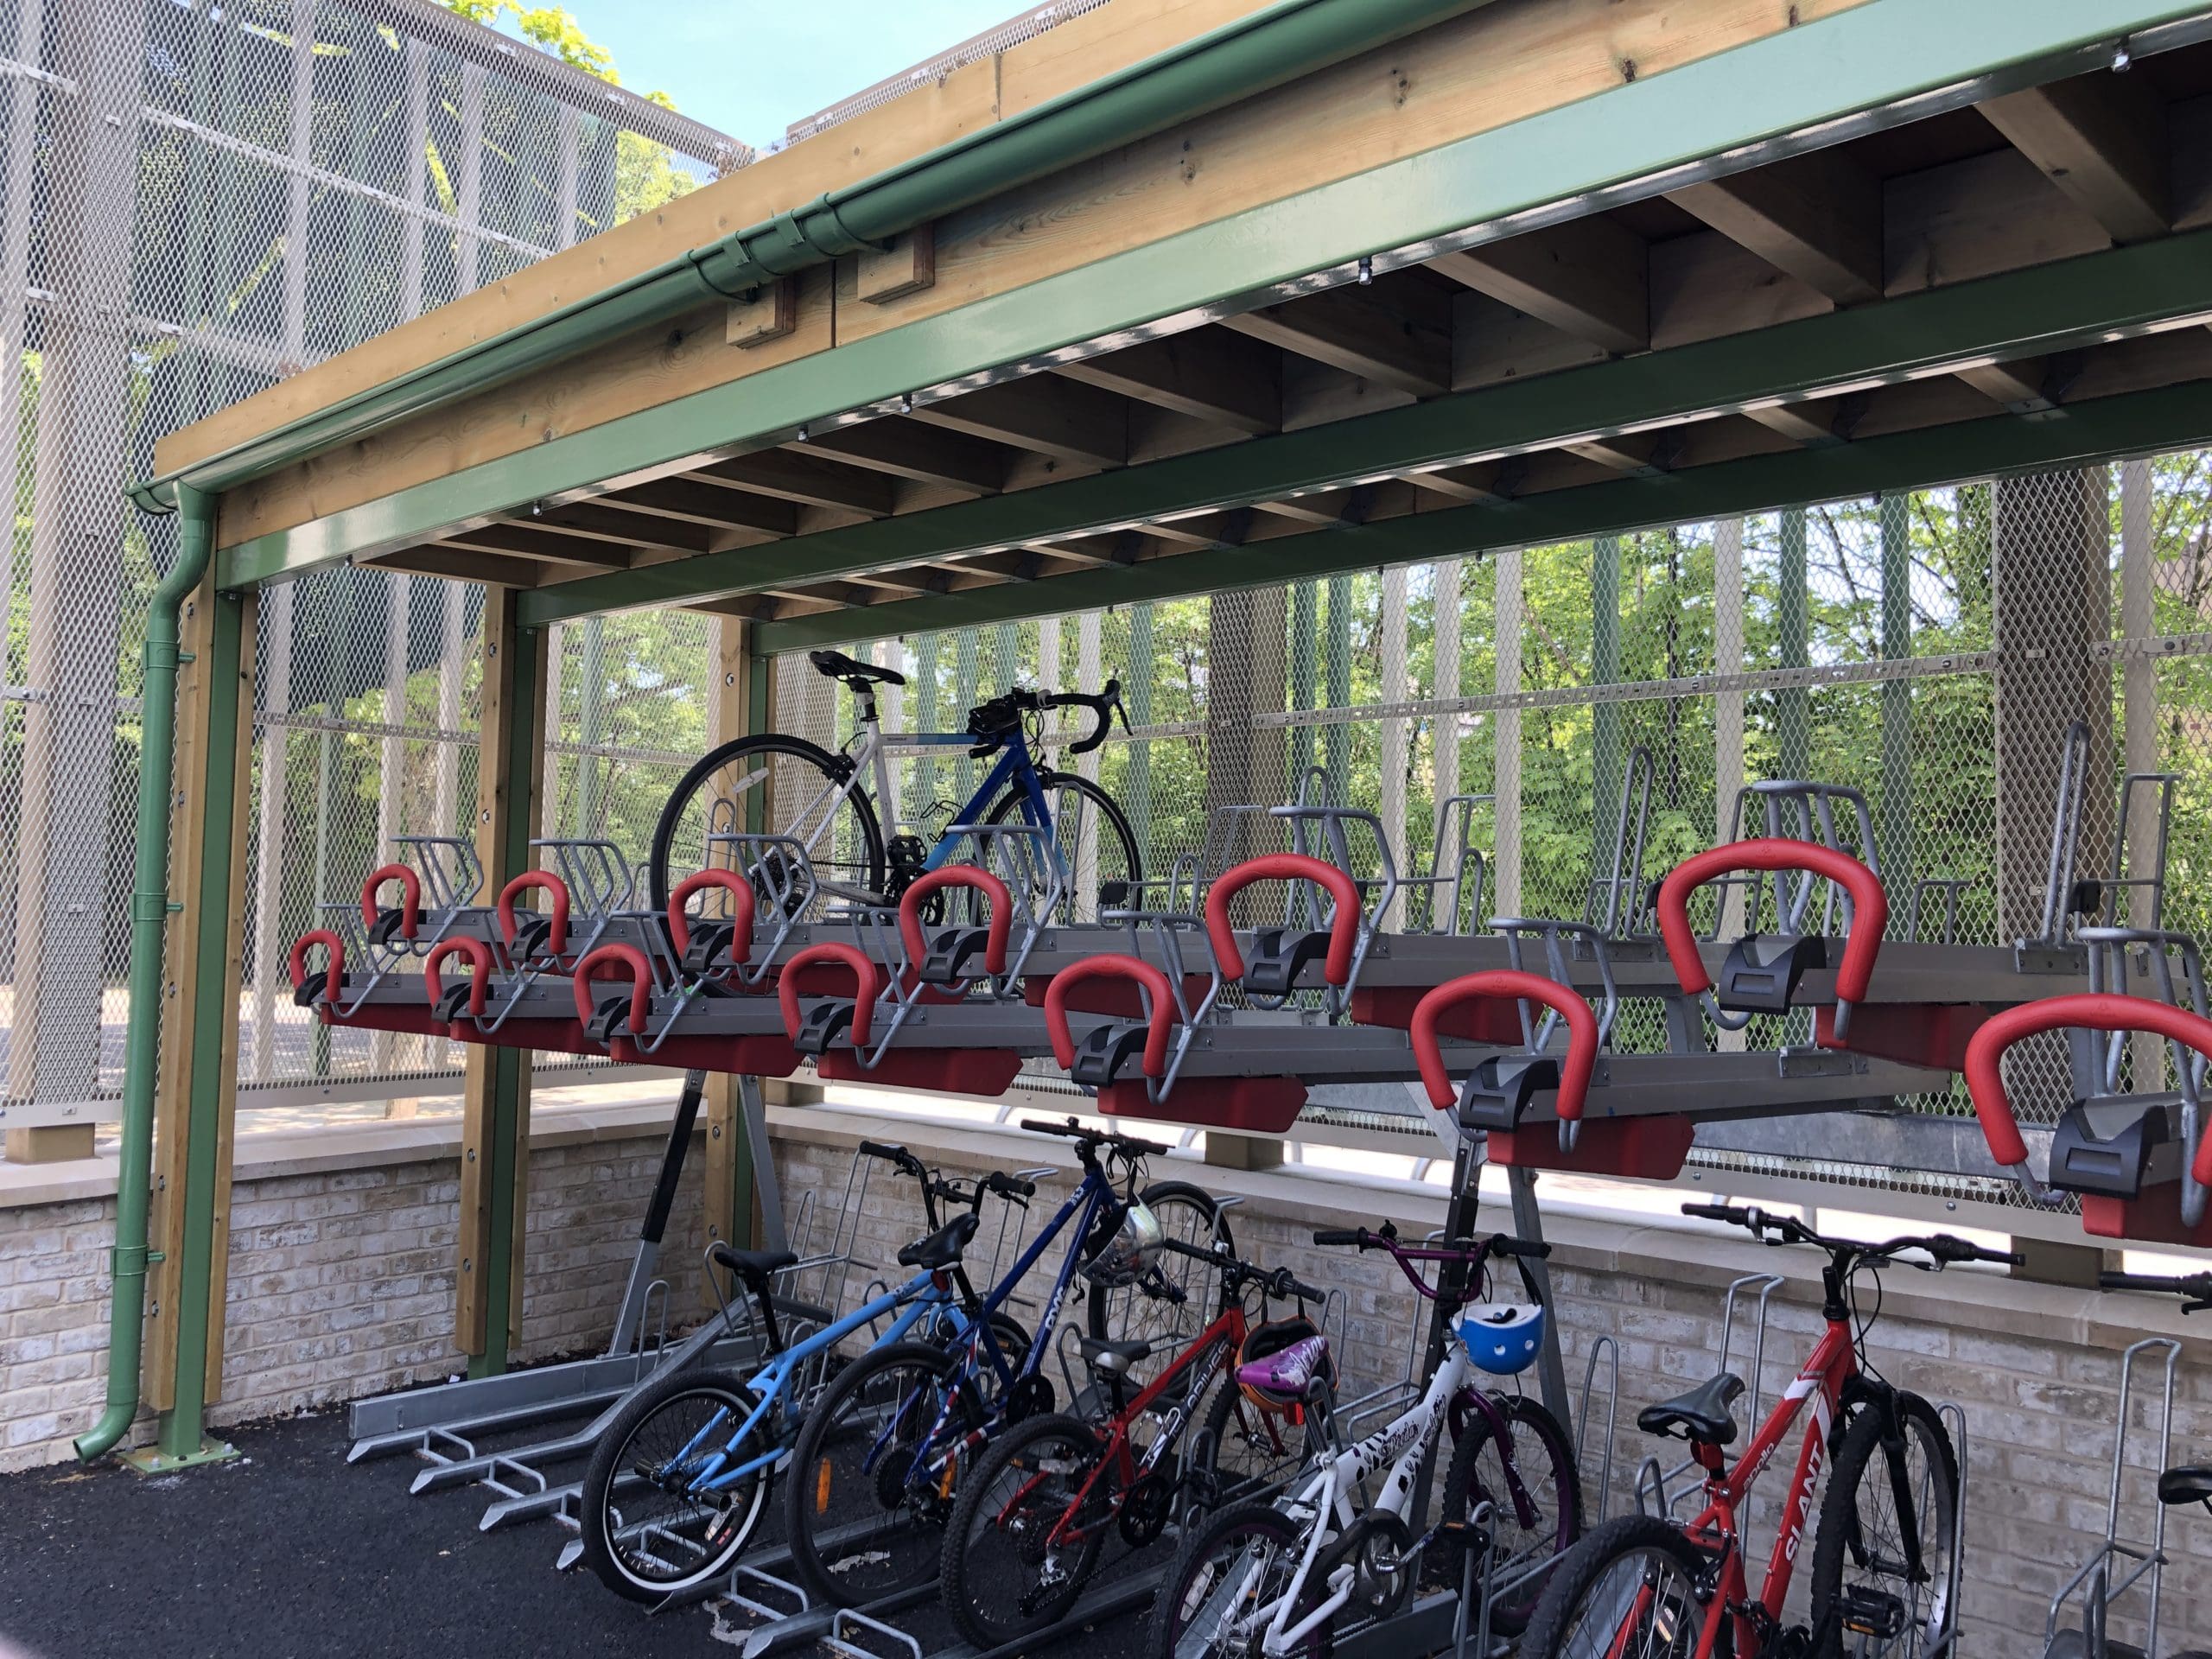 Outdoor wooden canopy with green metal drainage covering two tiered metal bike storage racks